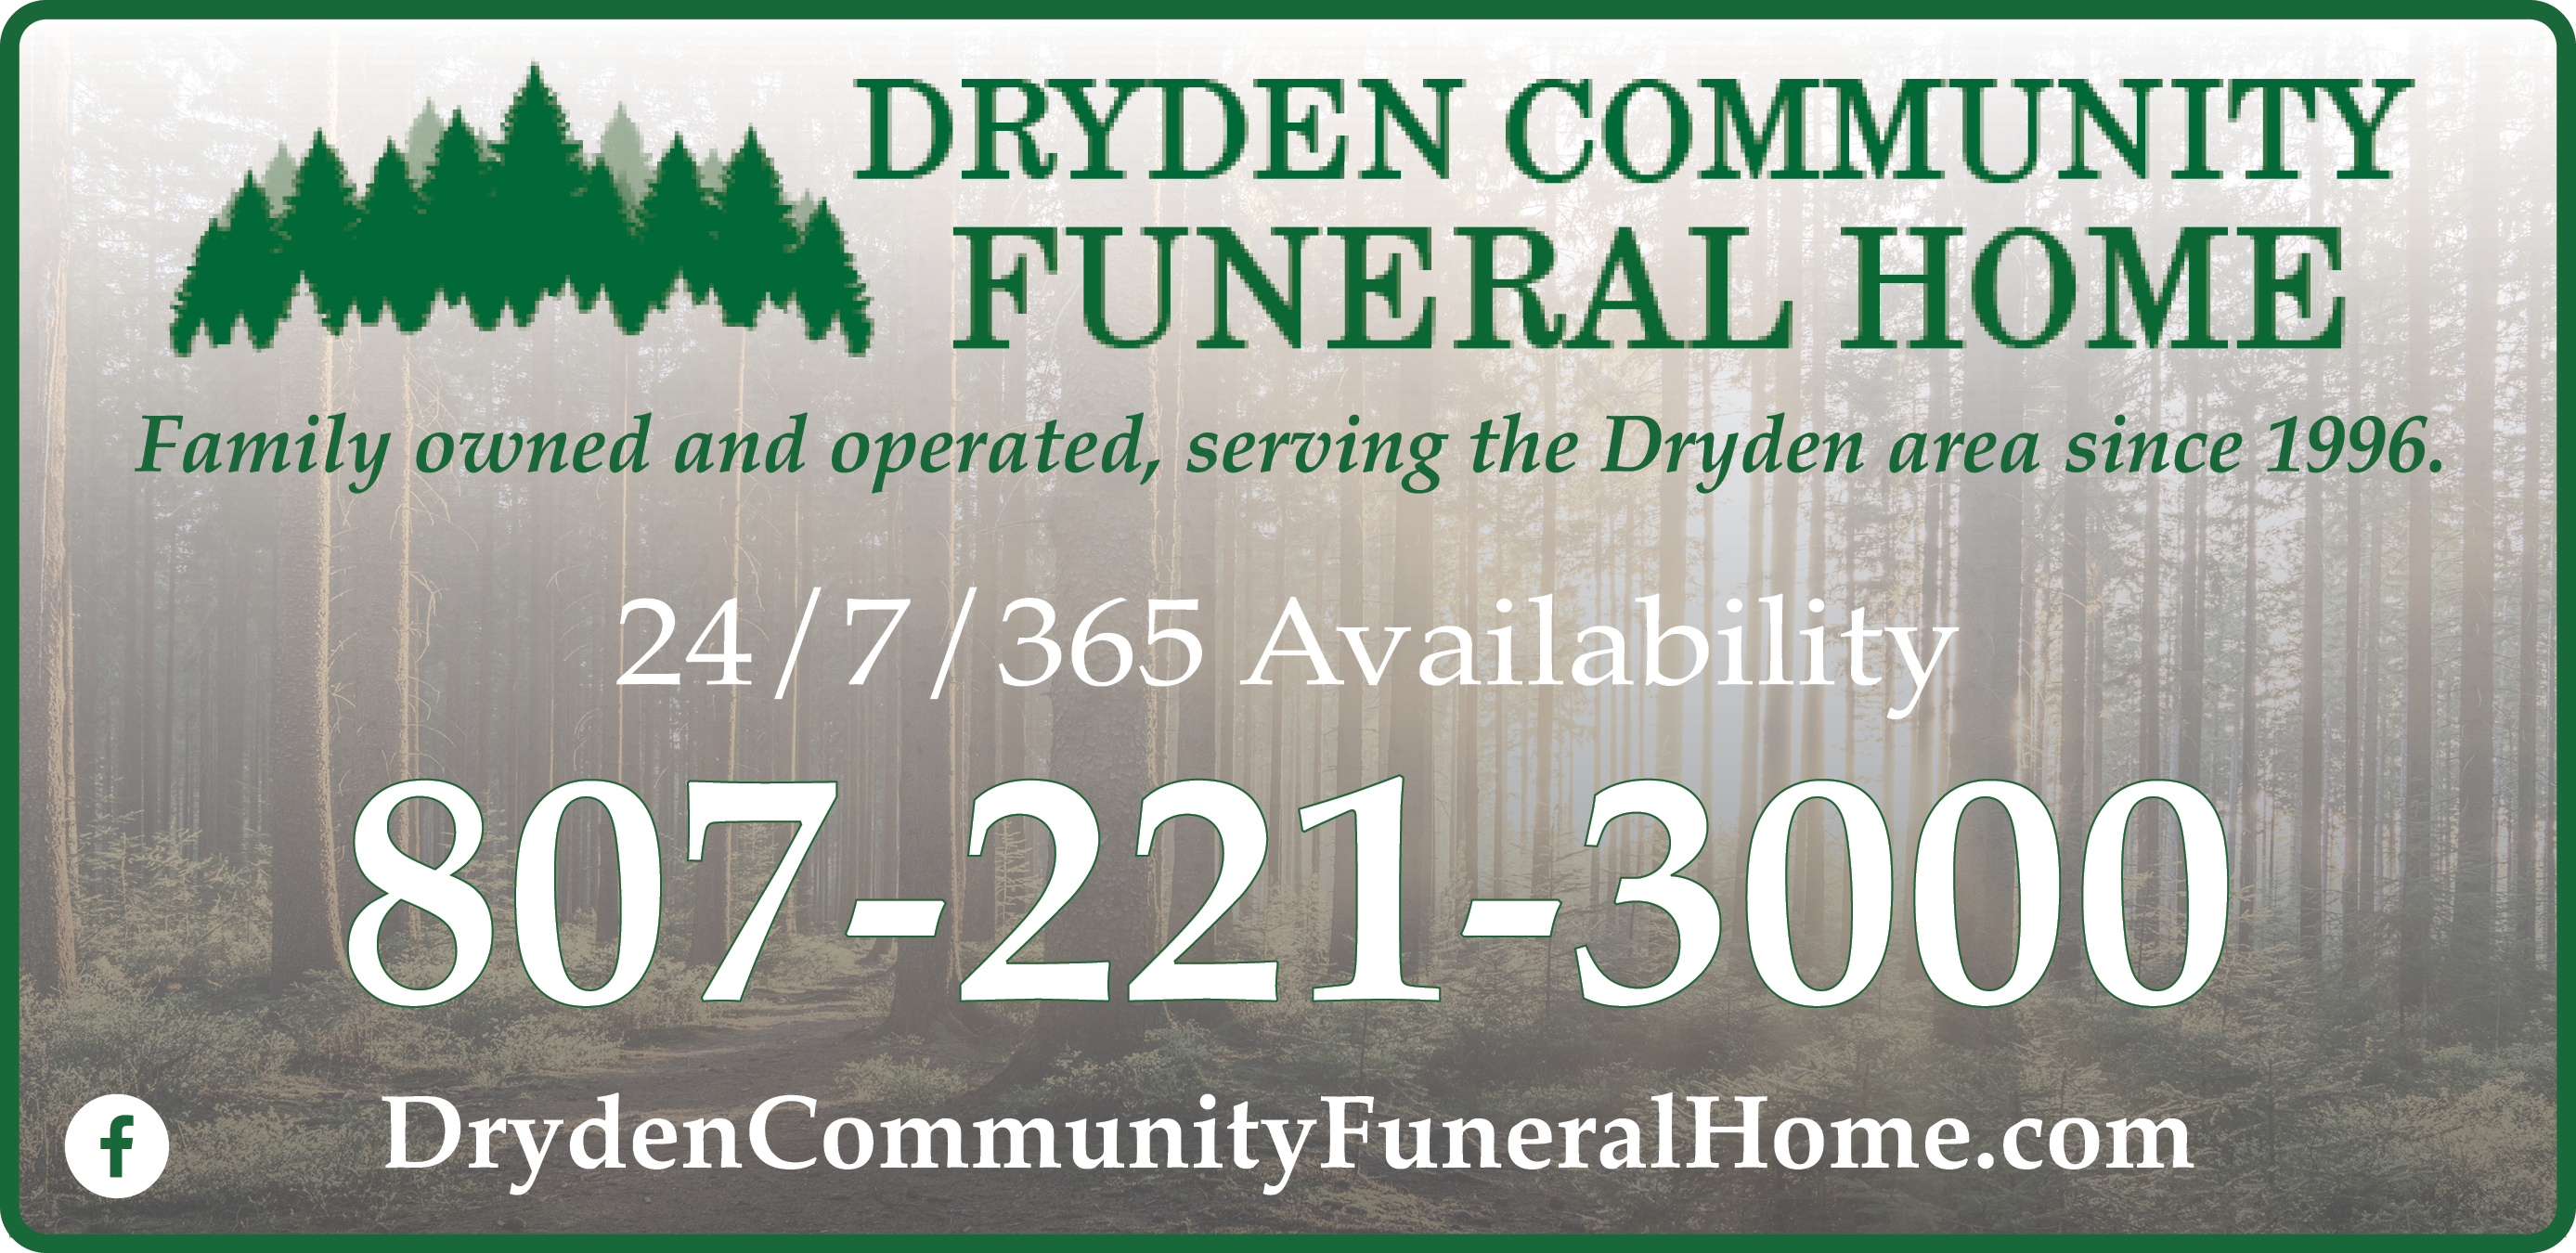 Dryden Community Funeral Home